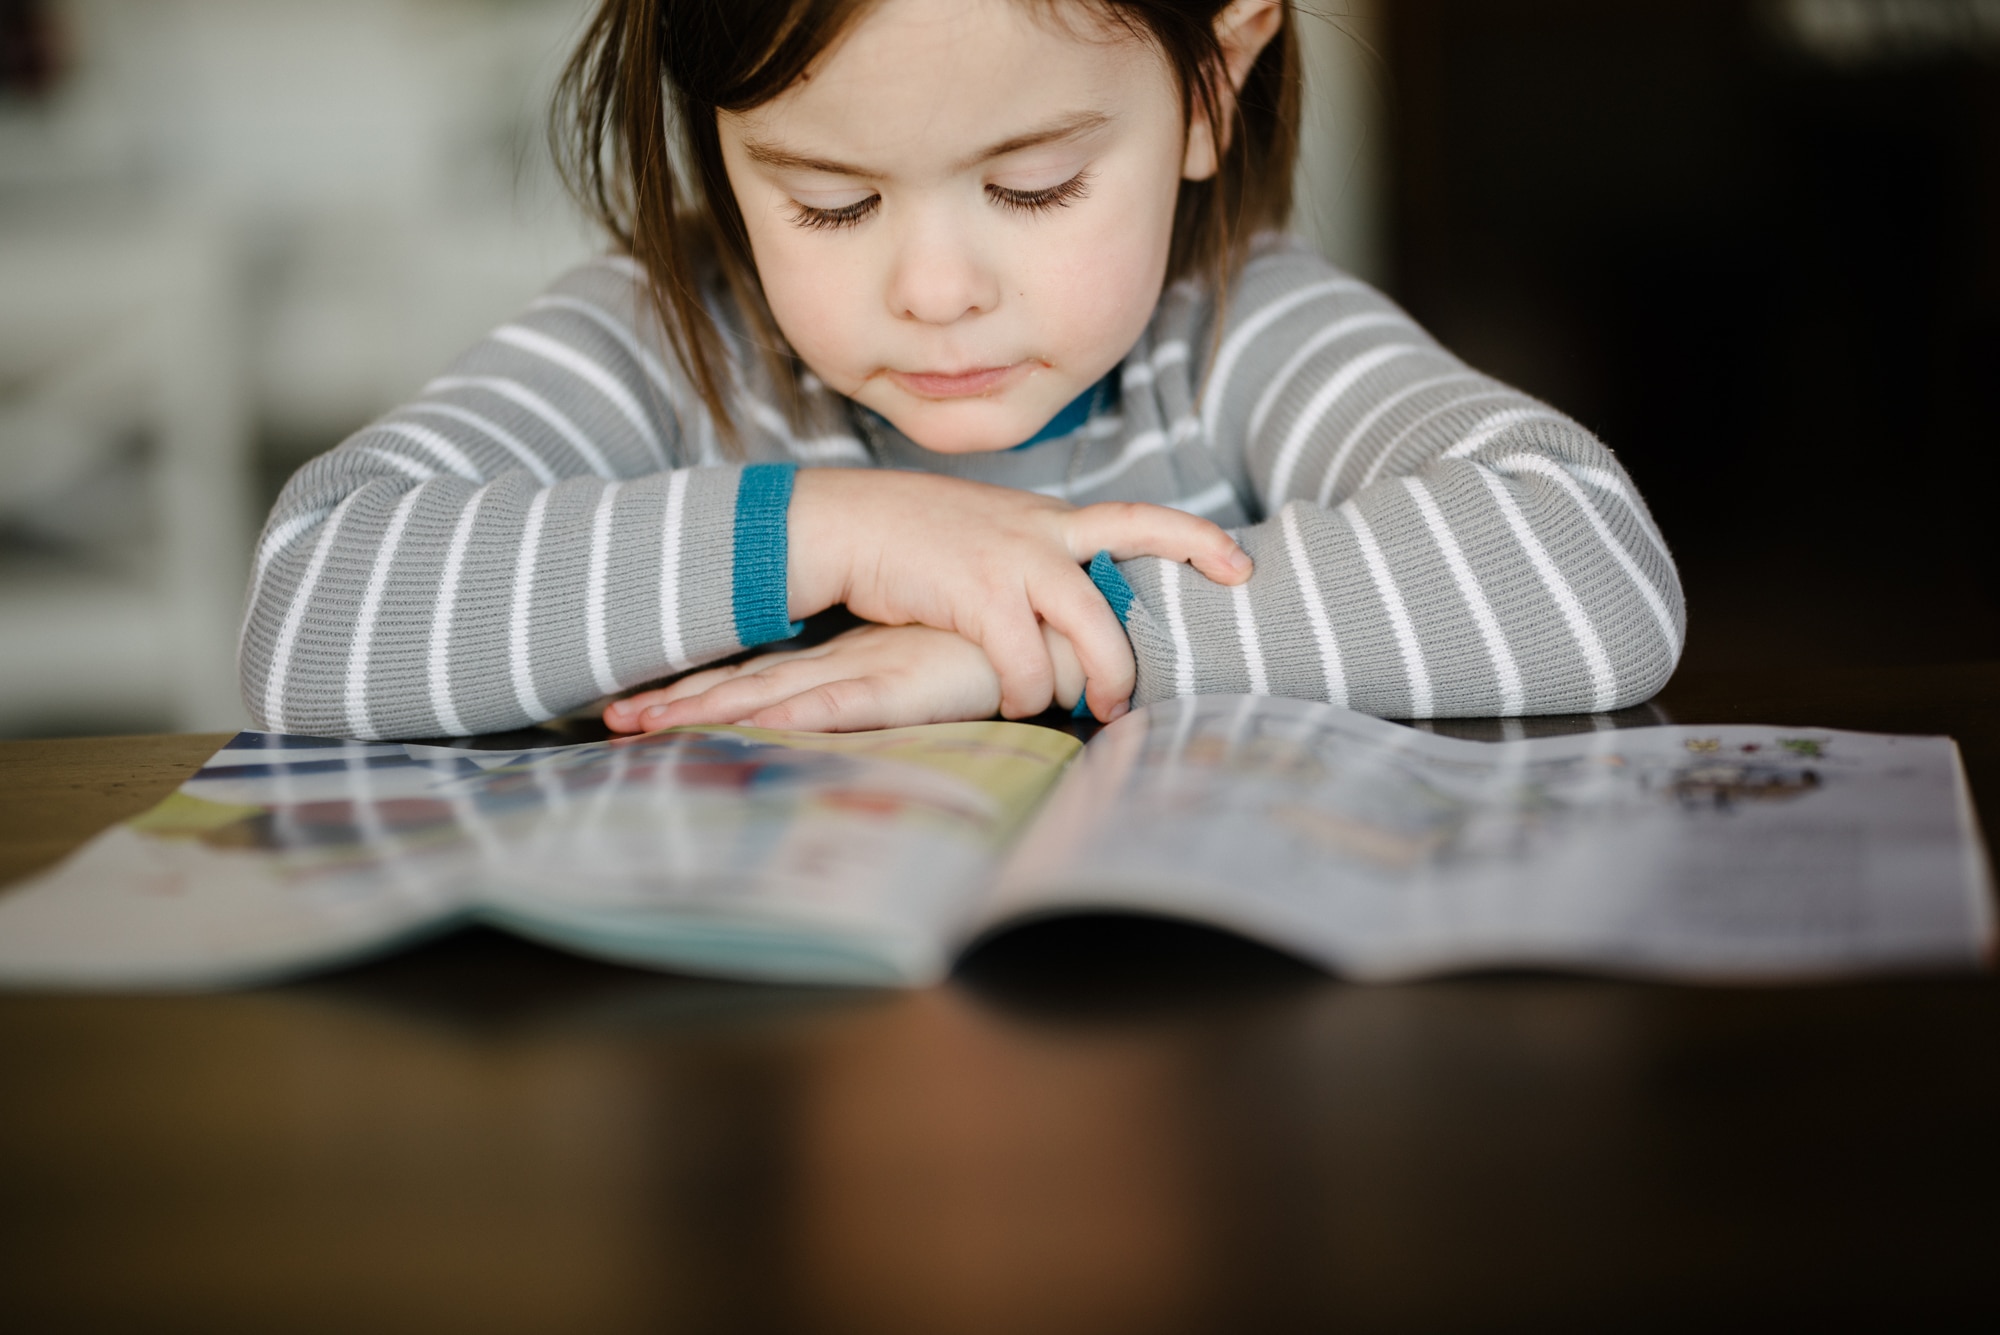 Child reading a book using indoor natural light